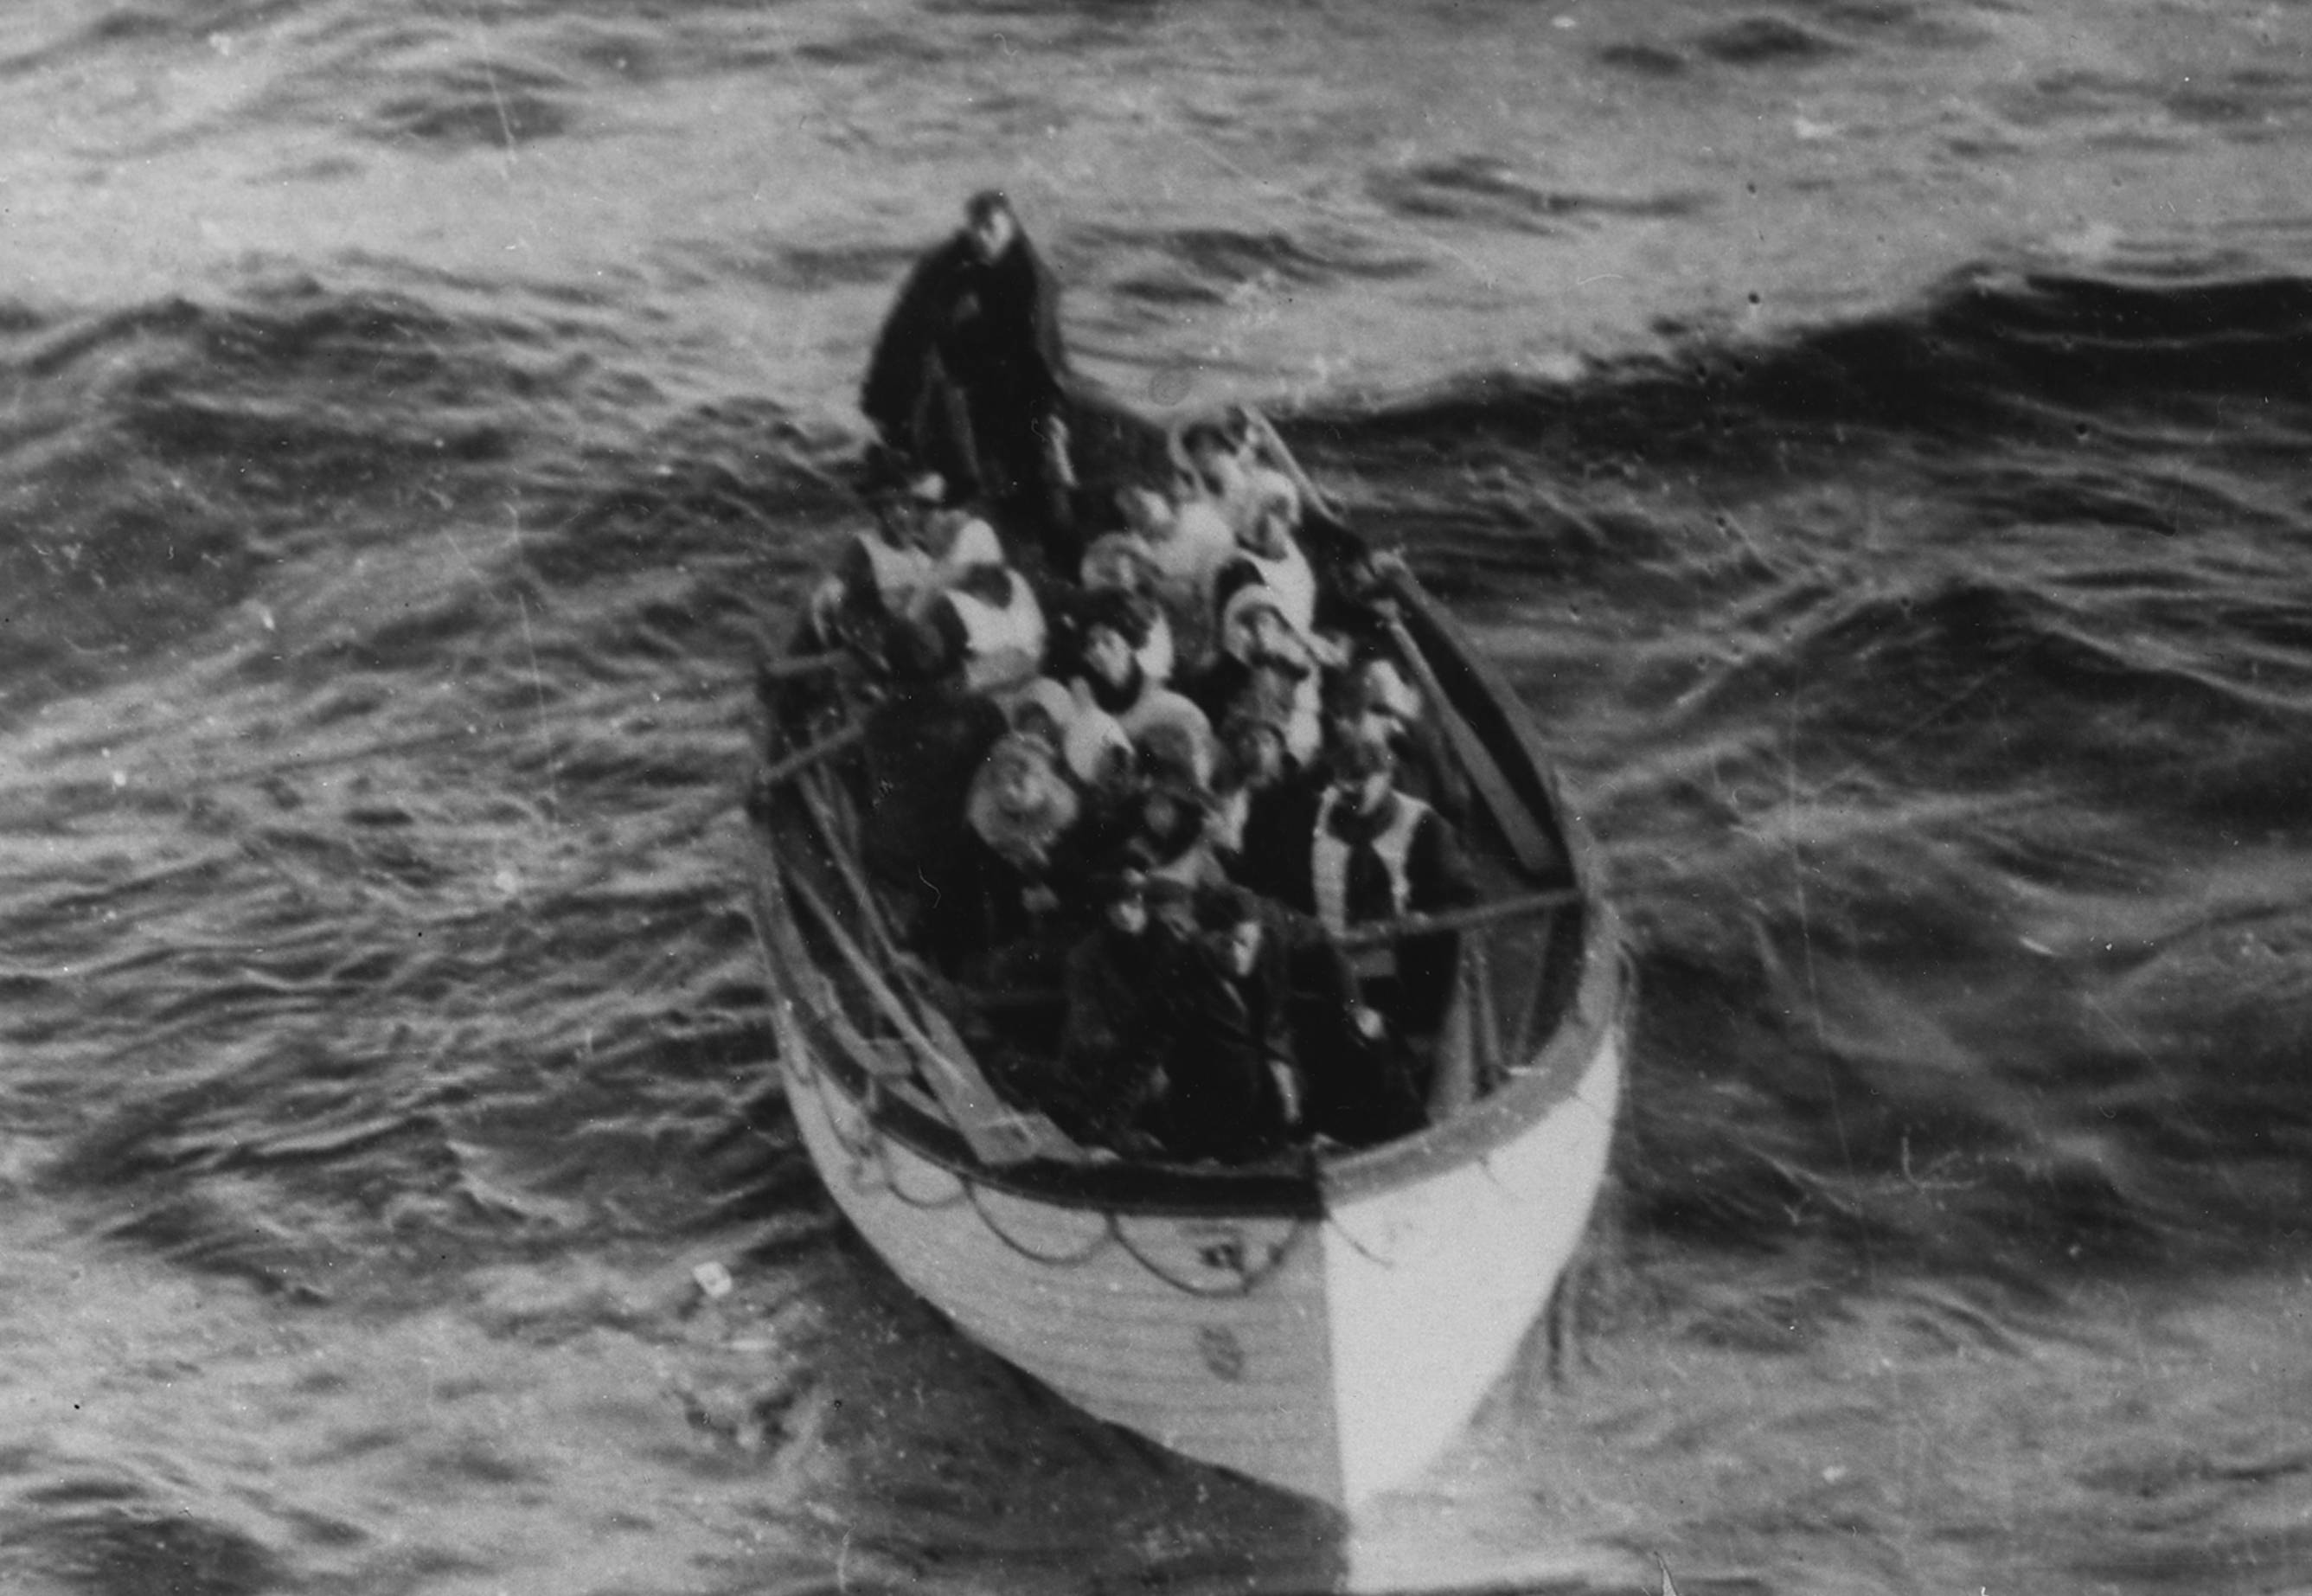 <p>On the night the <em>Titanic </em>sank, Brown helped with the evacuation. She managed to get a seat on Lifeboat 6, but later tried to encourage the boat's crewman to return to the wreck for more survivors. Sadly, they denied her desperate request.</p>